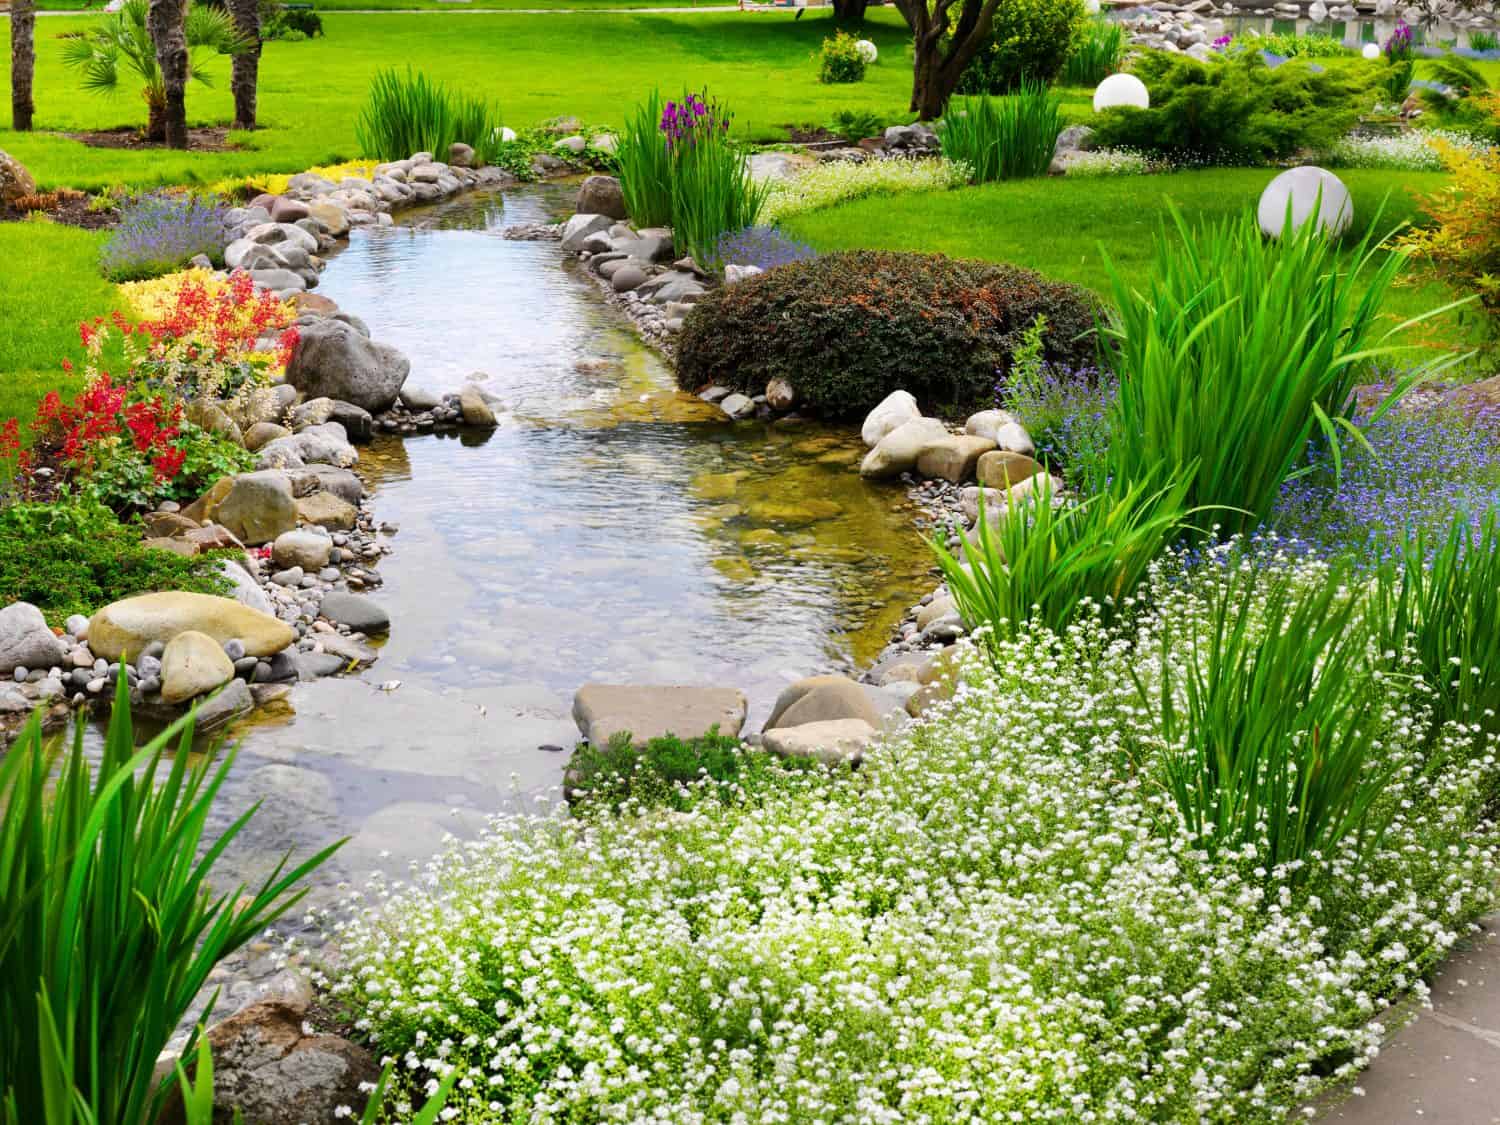 Spring flowers in the Asian garden with a pond